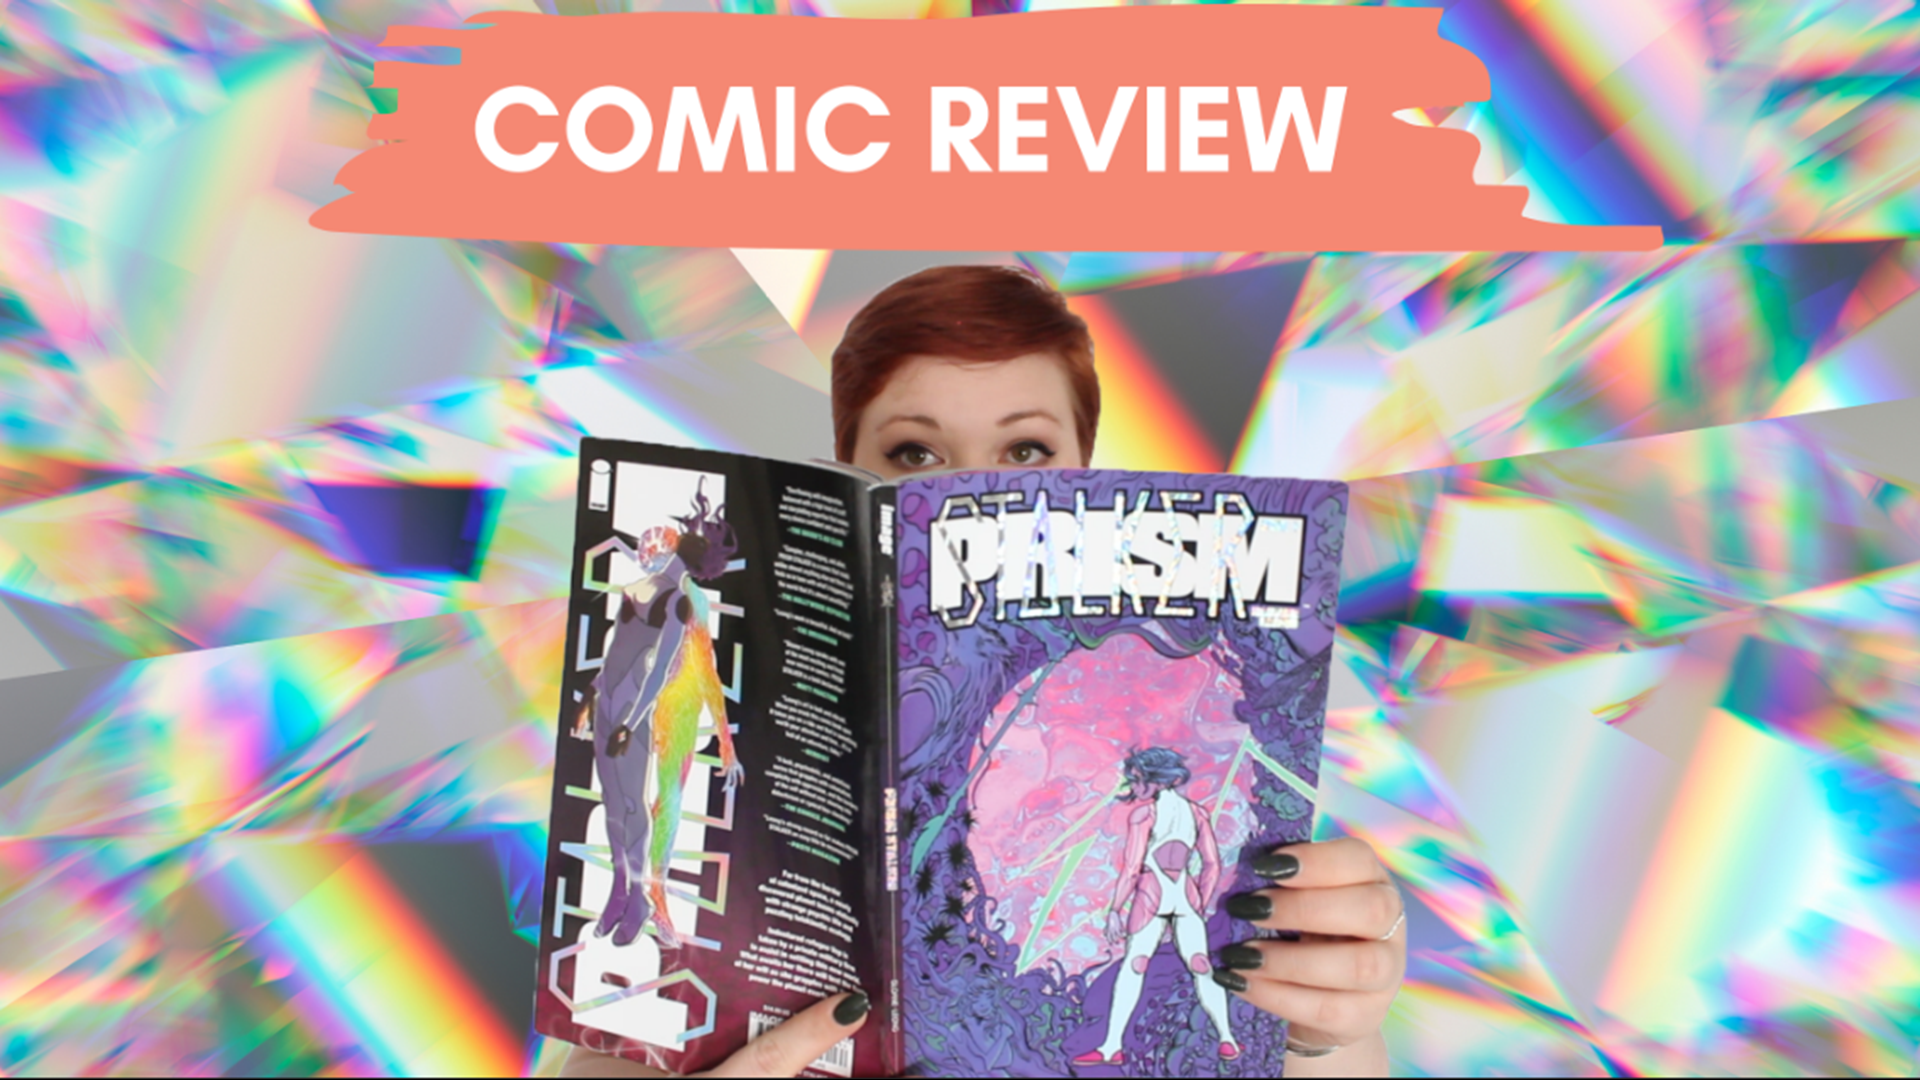 To continue the celebration of Portland Comic Book Month digital reporter Destiny Johnson reviewed Prism Stalker. A book about a refugee girl on an alien planet written, drawn, and colored by Portland-based Sloane Leong.